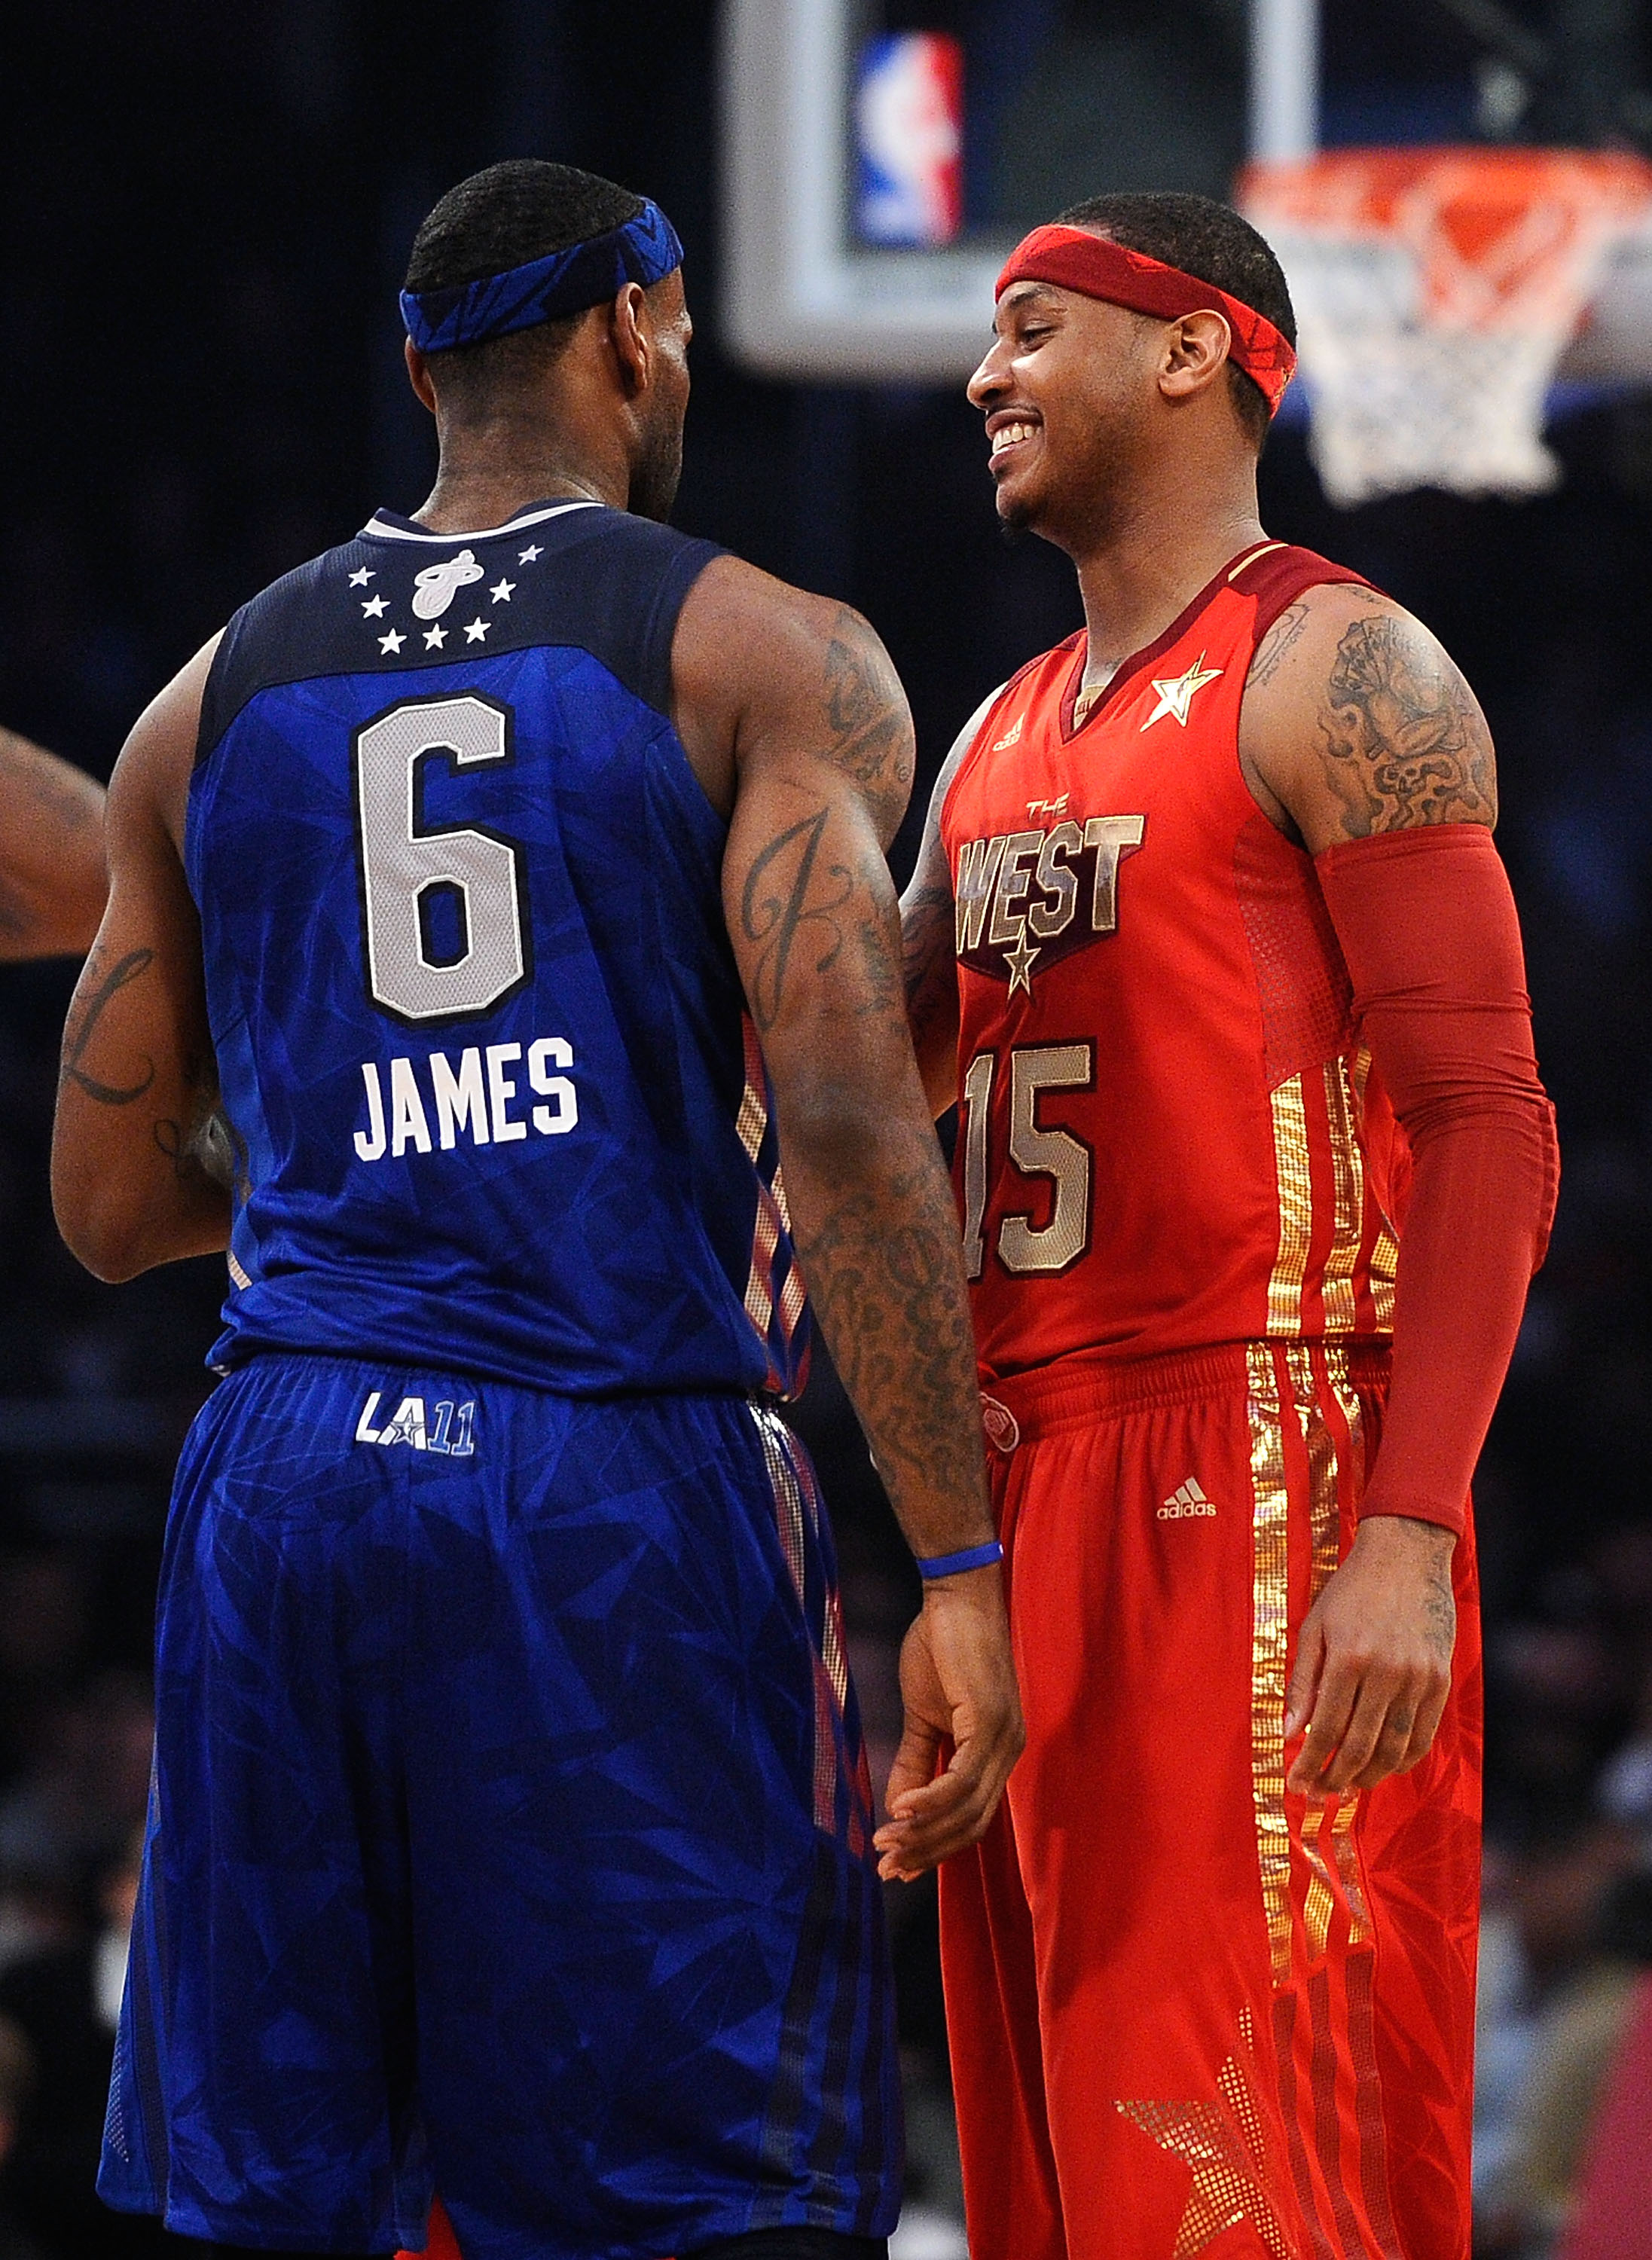 Carmelo Anthony and LeBron James: How New York Knicks Match Up vs